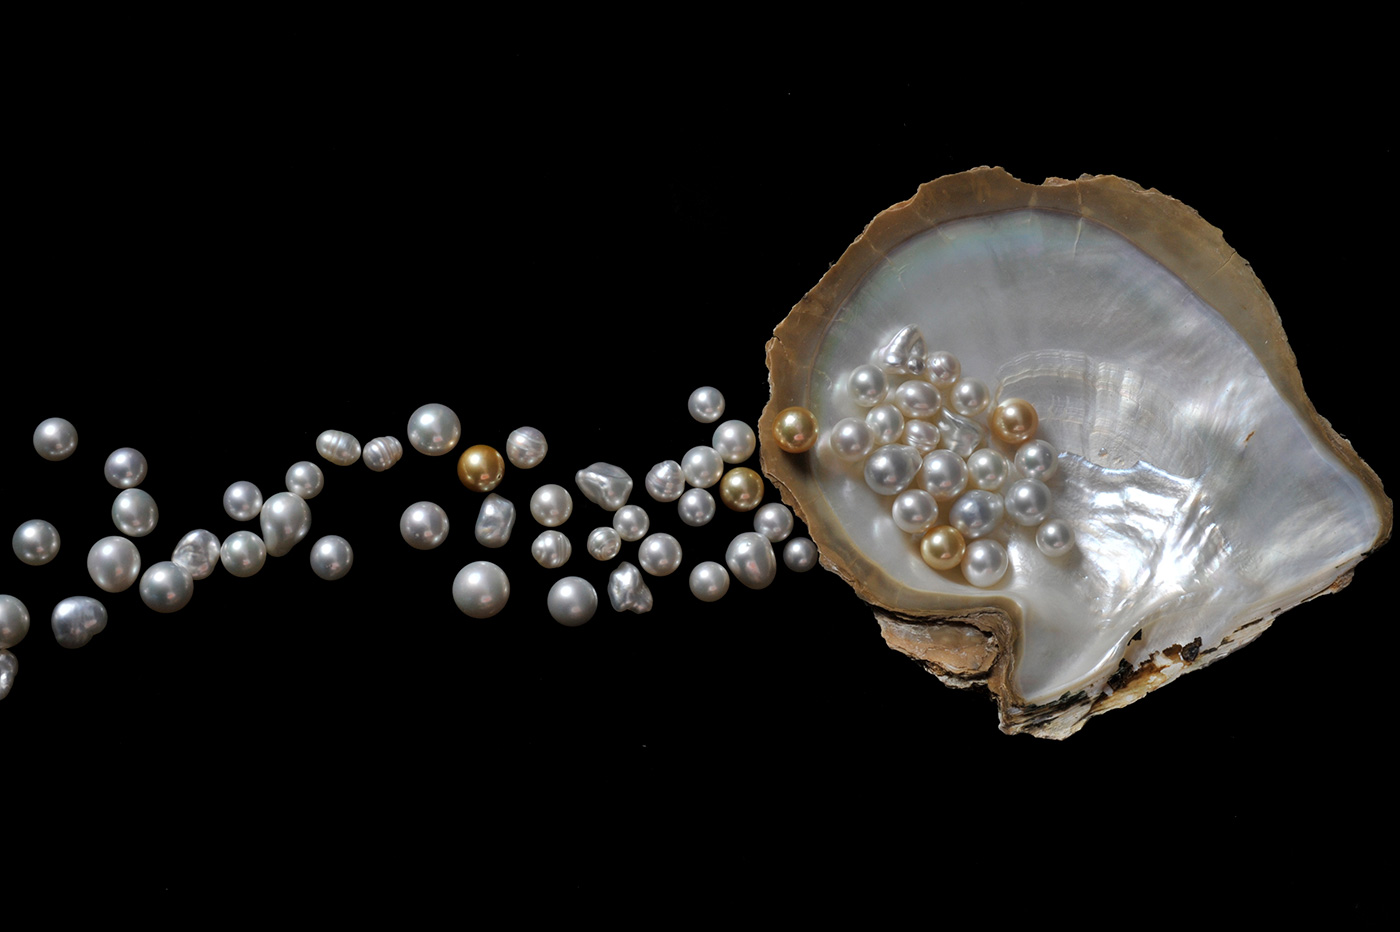 Pearls scattered over an oyster shell - click to view larger image